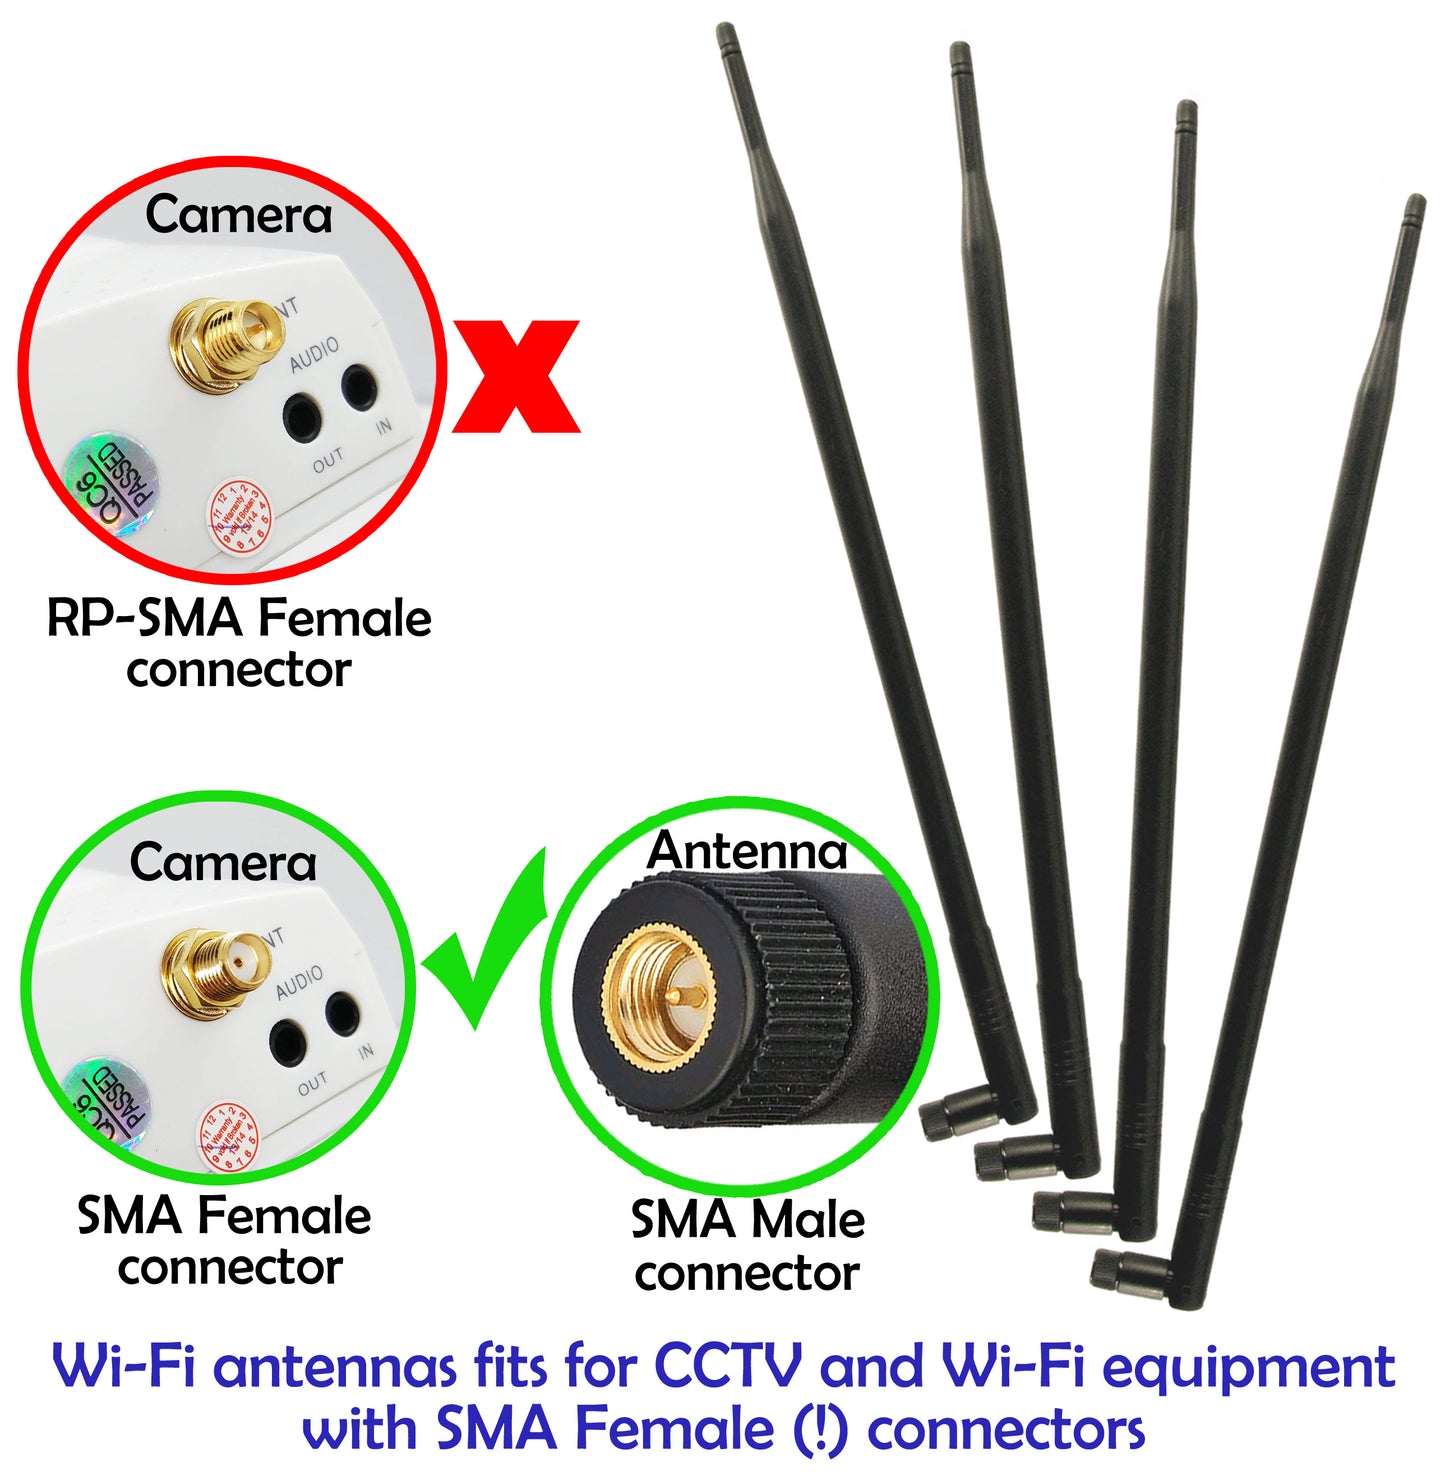 4 pcs of Universal 9dBi Wi-Fi 2.4/5GHz Dual-Band SMA Male Antennas Extension for IP Wireless Security Camera Router and CCTV HD Wireless Camera System Video Antenna for NVR Security IP System